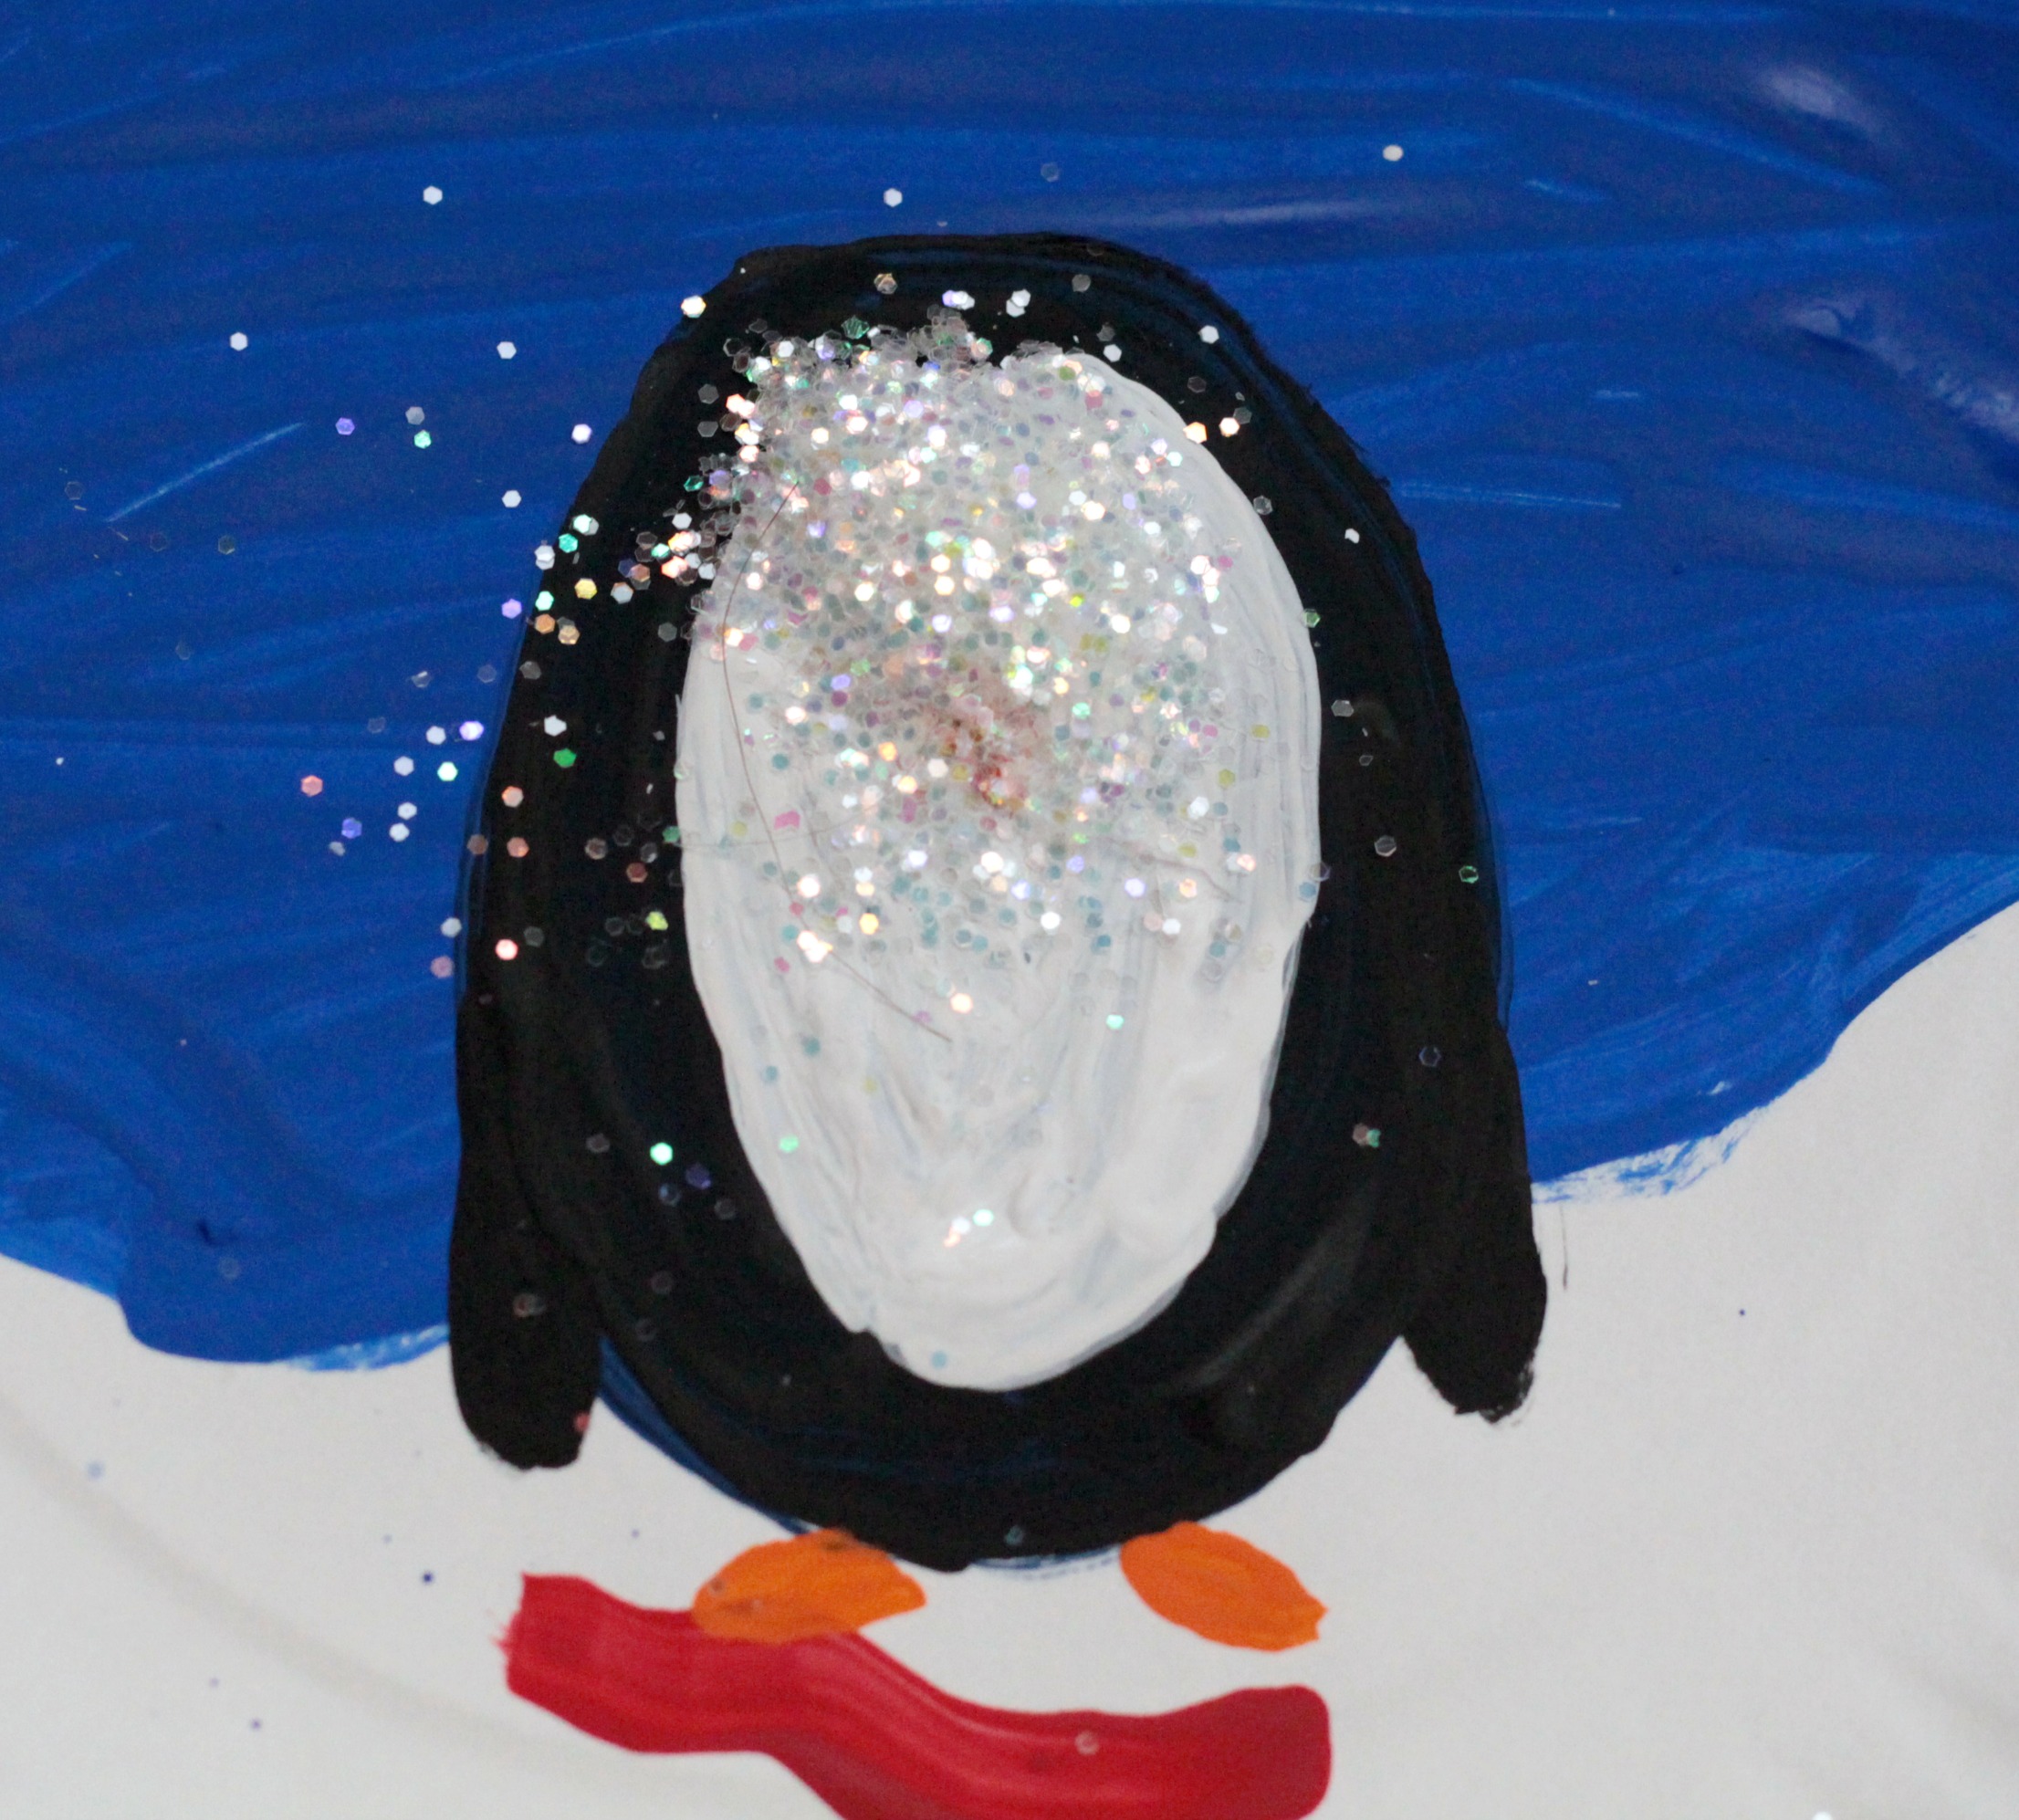 Instead of playing with dangerous and messy snow globes, kids can make their own paper plate penguin snow globe using a paper plate and some craft supplies!